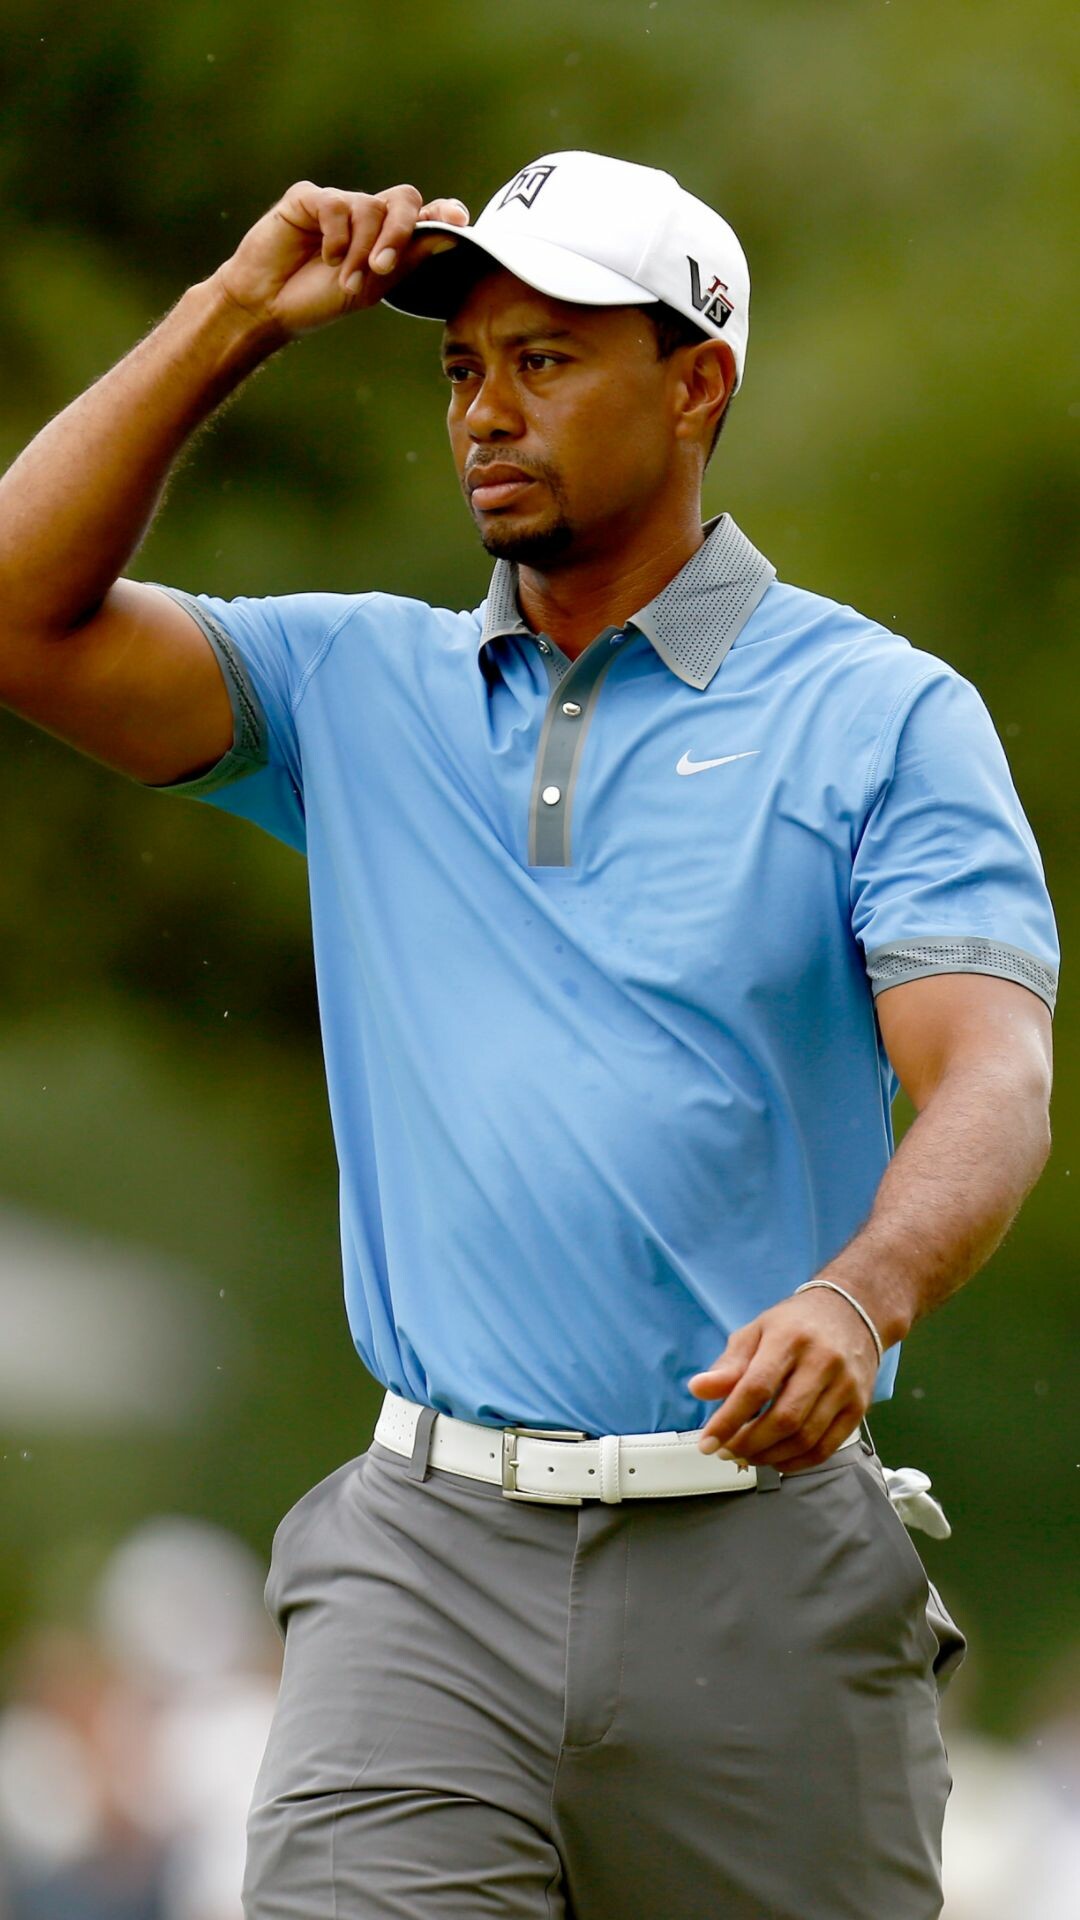 Tiger Woods: The fourth golfer to receive the Presidential Medal of Freedom. 1080x1920 Full HD Wallpaper.